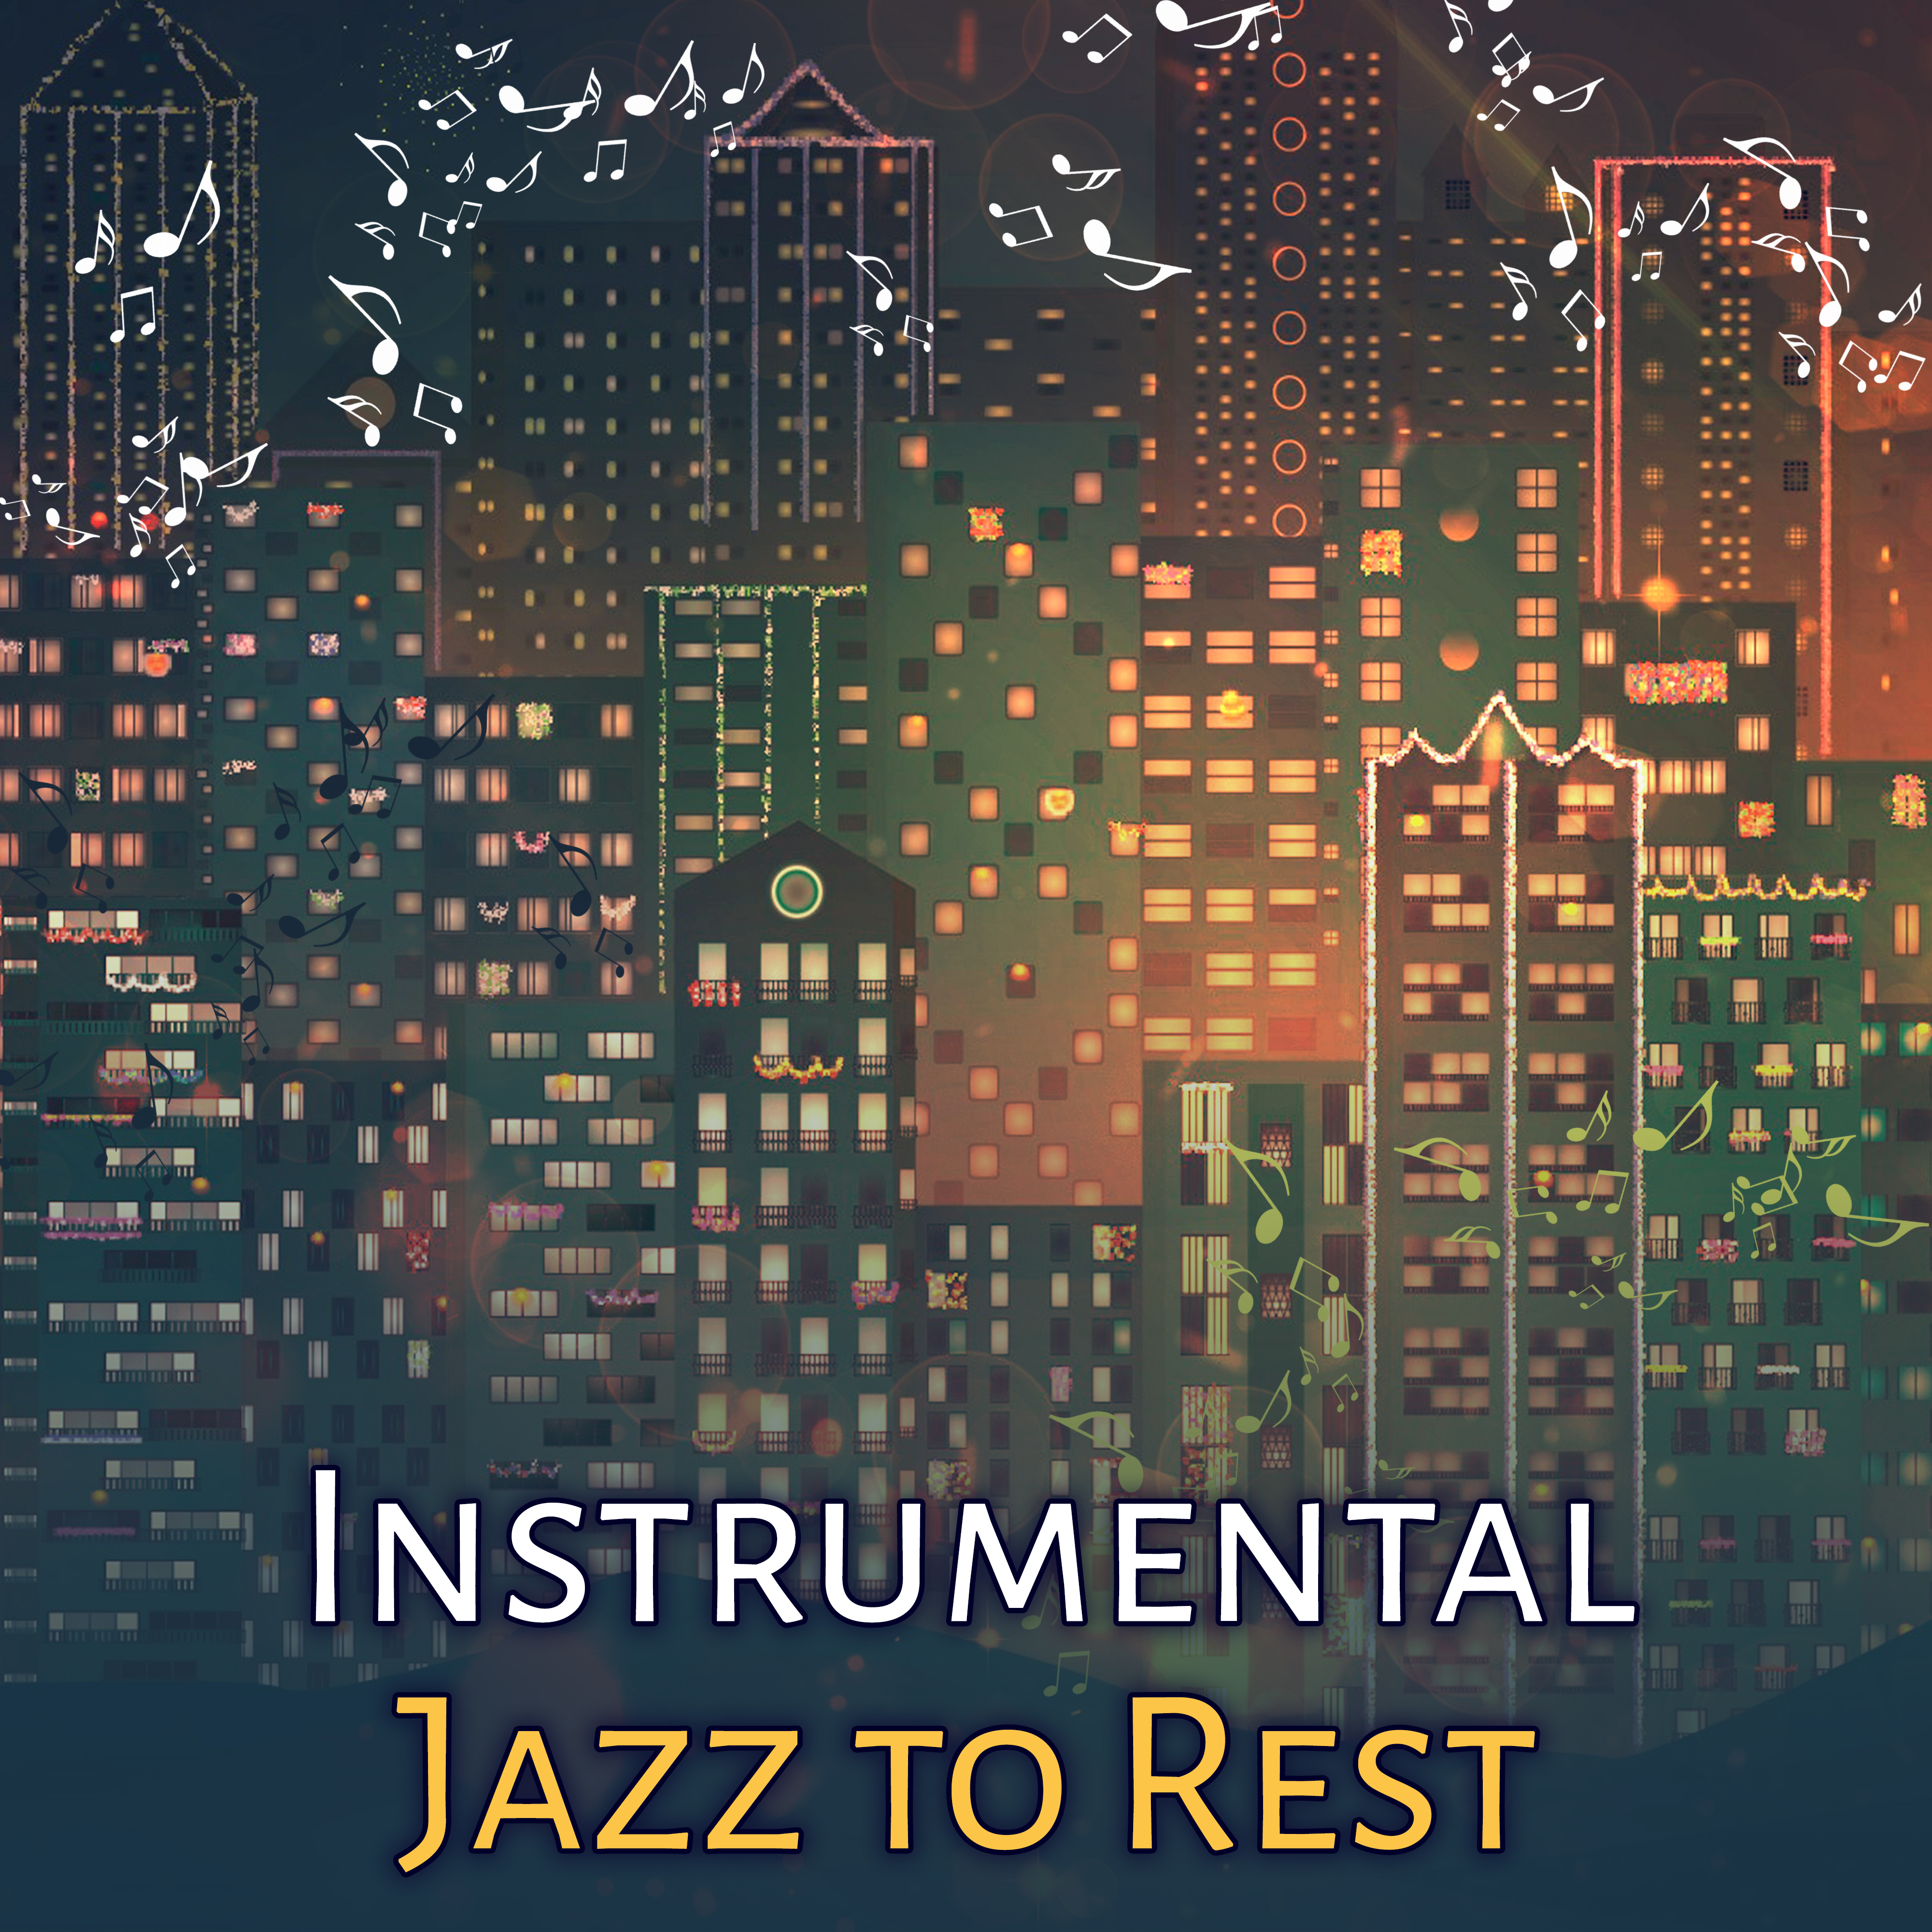 Instrumental Jazz to Rest  Calming Sounds, Piano Bar, Jazz Music, Smooth Moves, Moonlight Note